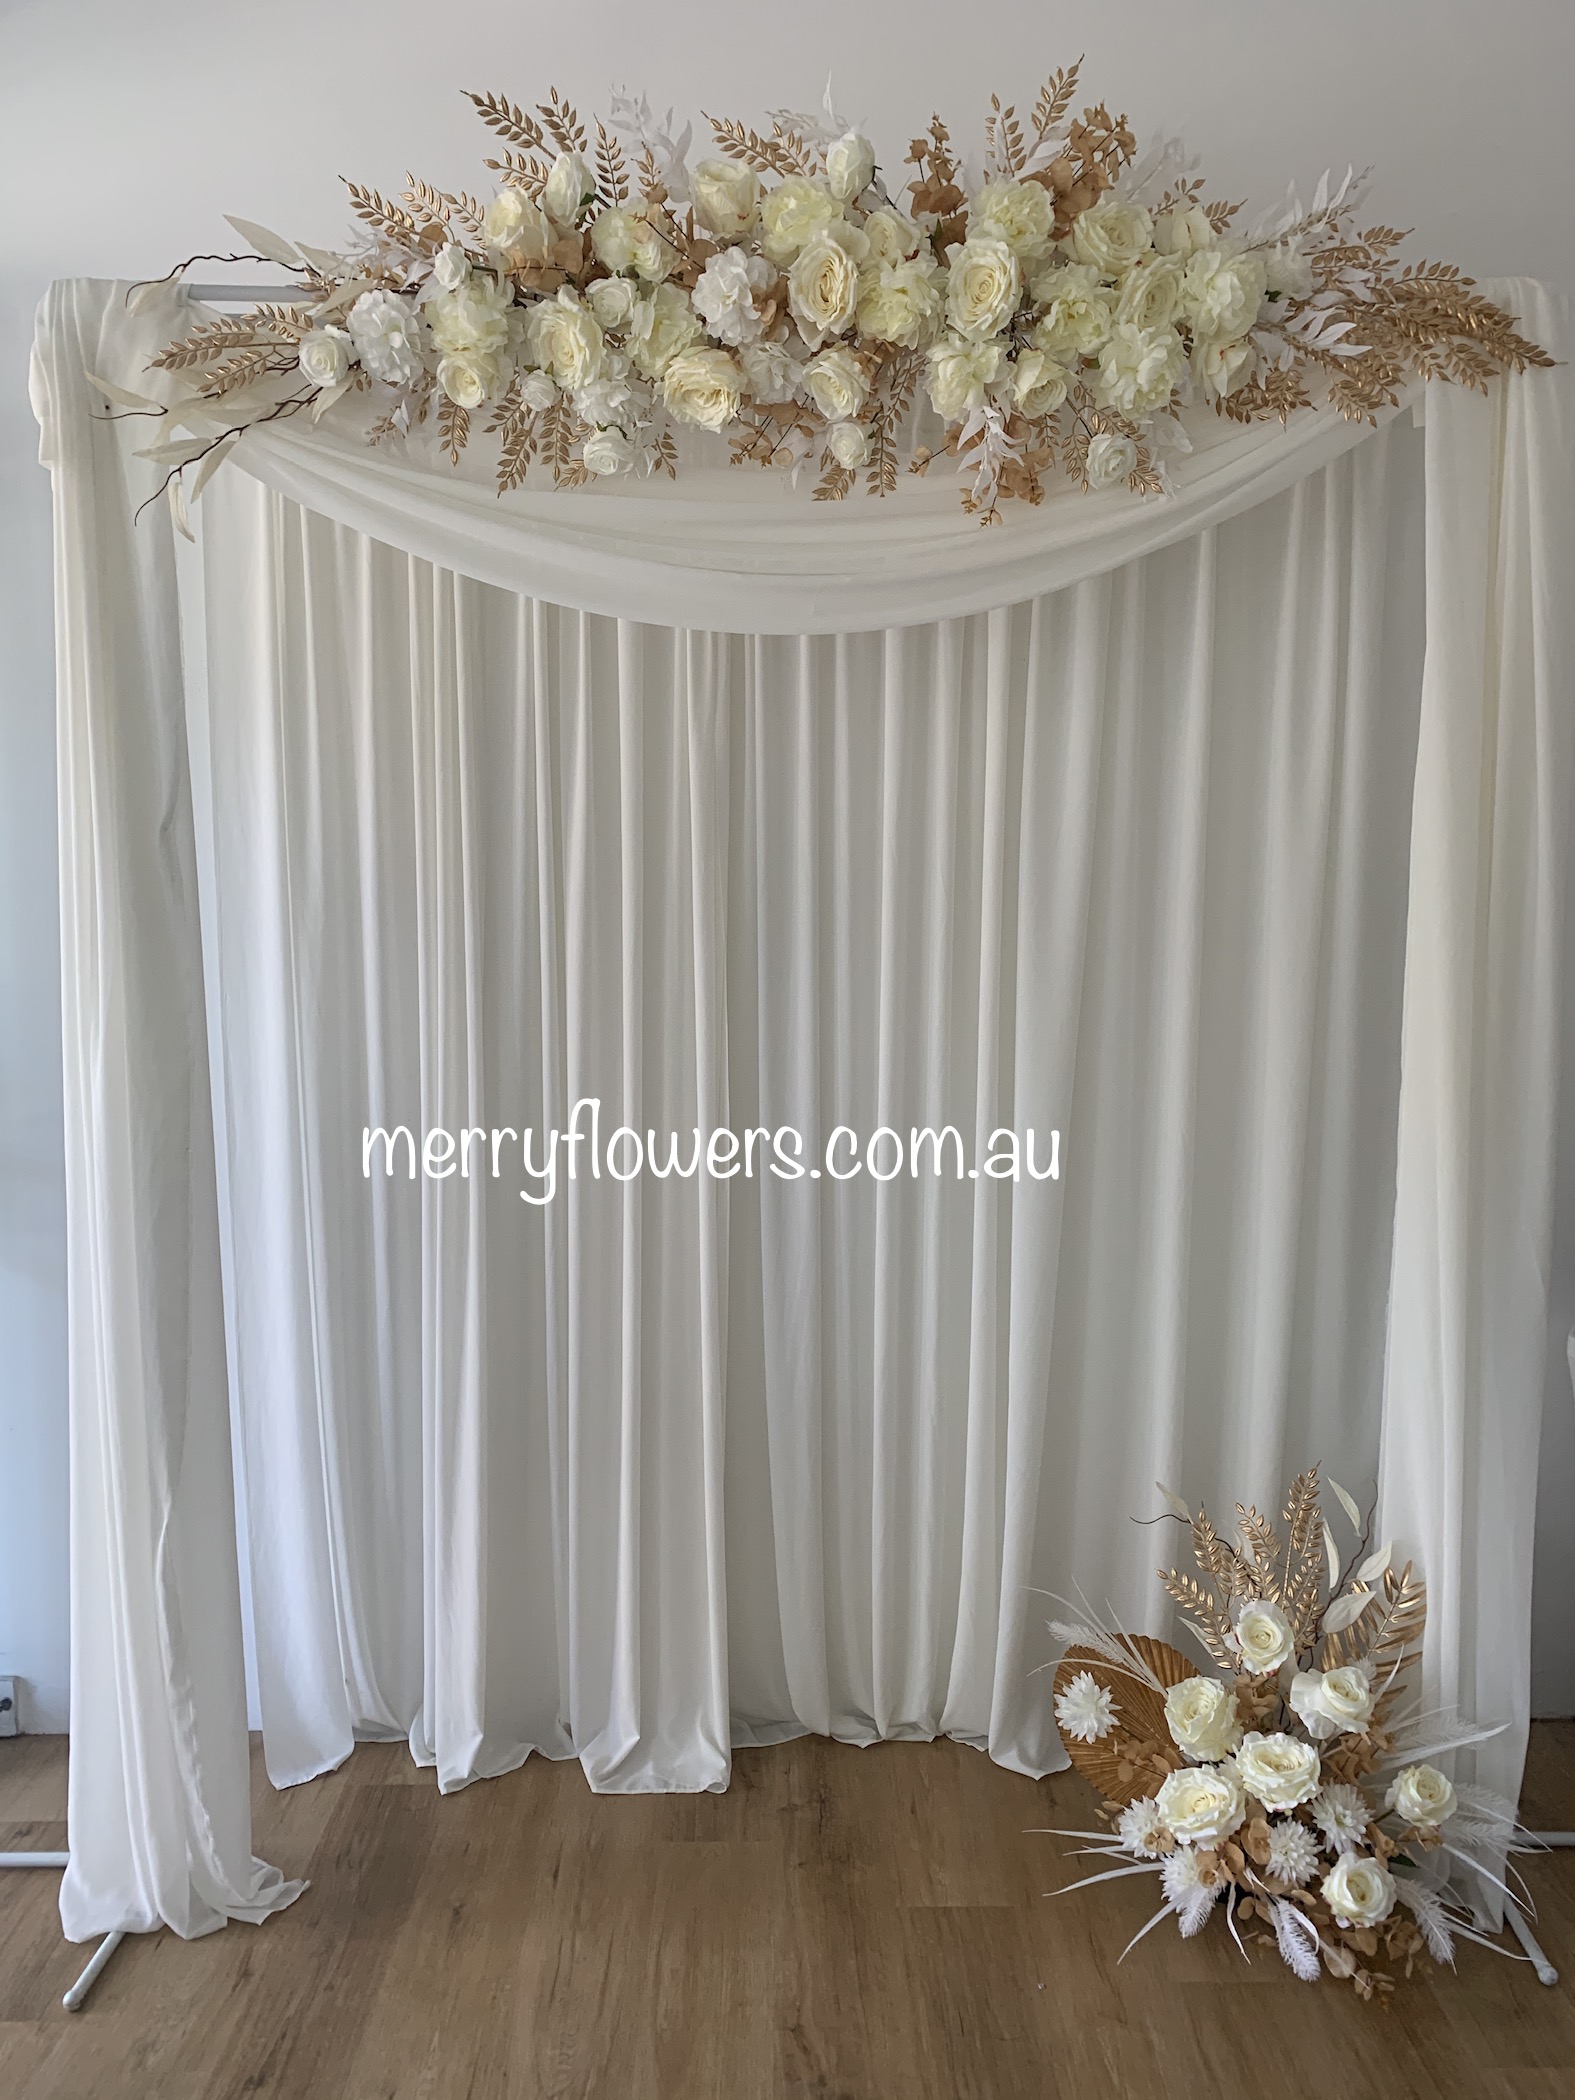 C006-Backdrop/Arch with flowers